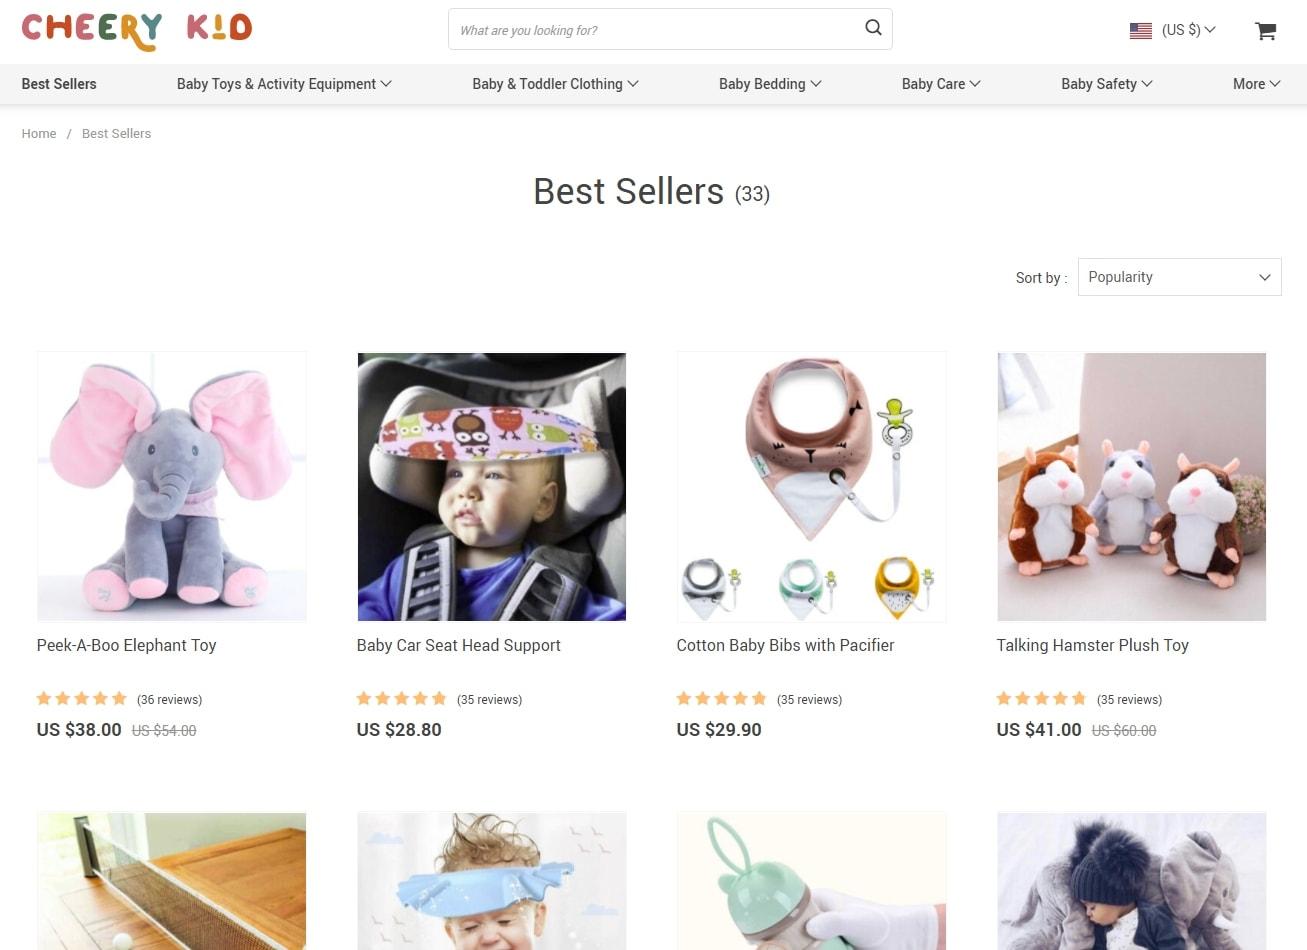 Cheery Kid's Best Sellers category containing the top child products 